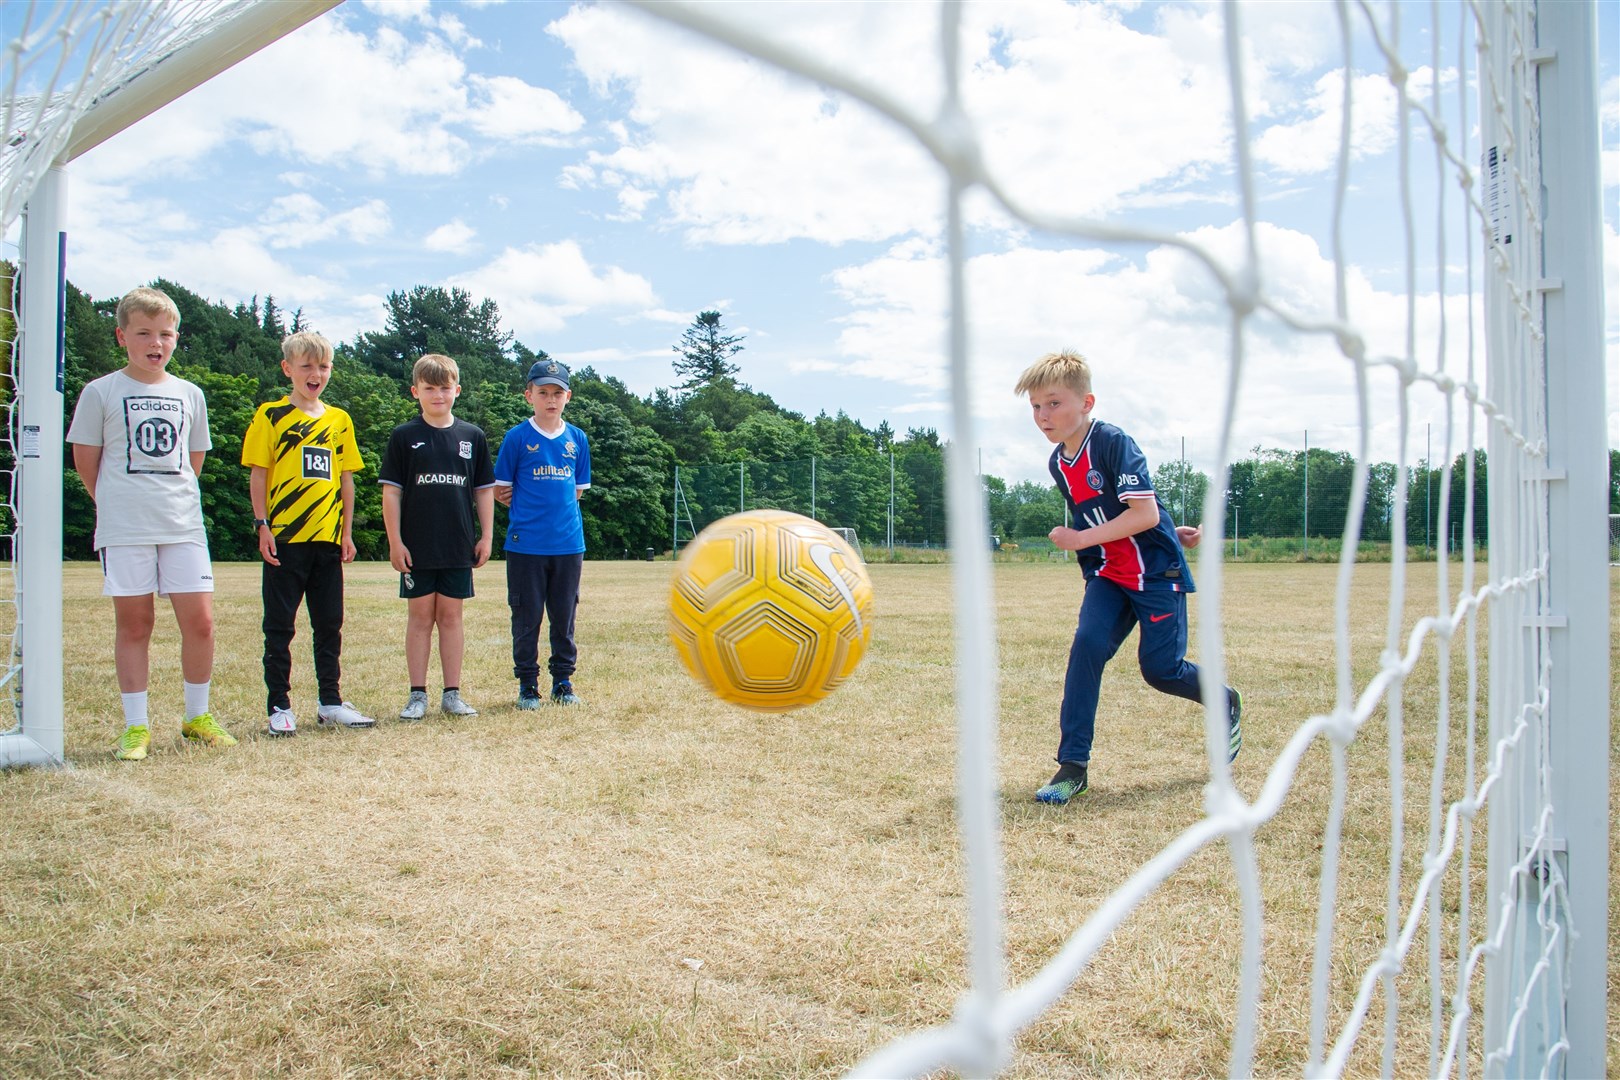 Mitchell Grant takes a shot at goal watched on by Mackie Stewart, Louie Buchan, Louie Buchan and Tyler McCabe...New football goals have been put up at Thornhill Playing Field in New Elgin after a fundraising campaign raised Â£4,000 for the cause. ..Picture: Daniel Forsyth..